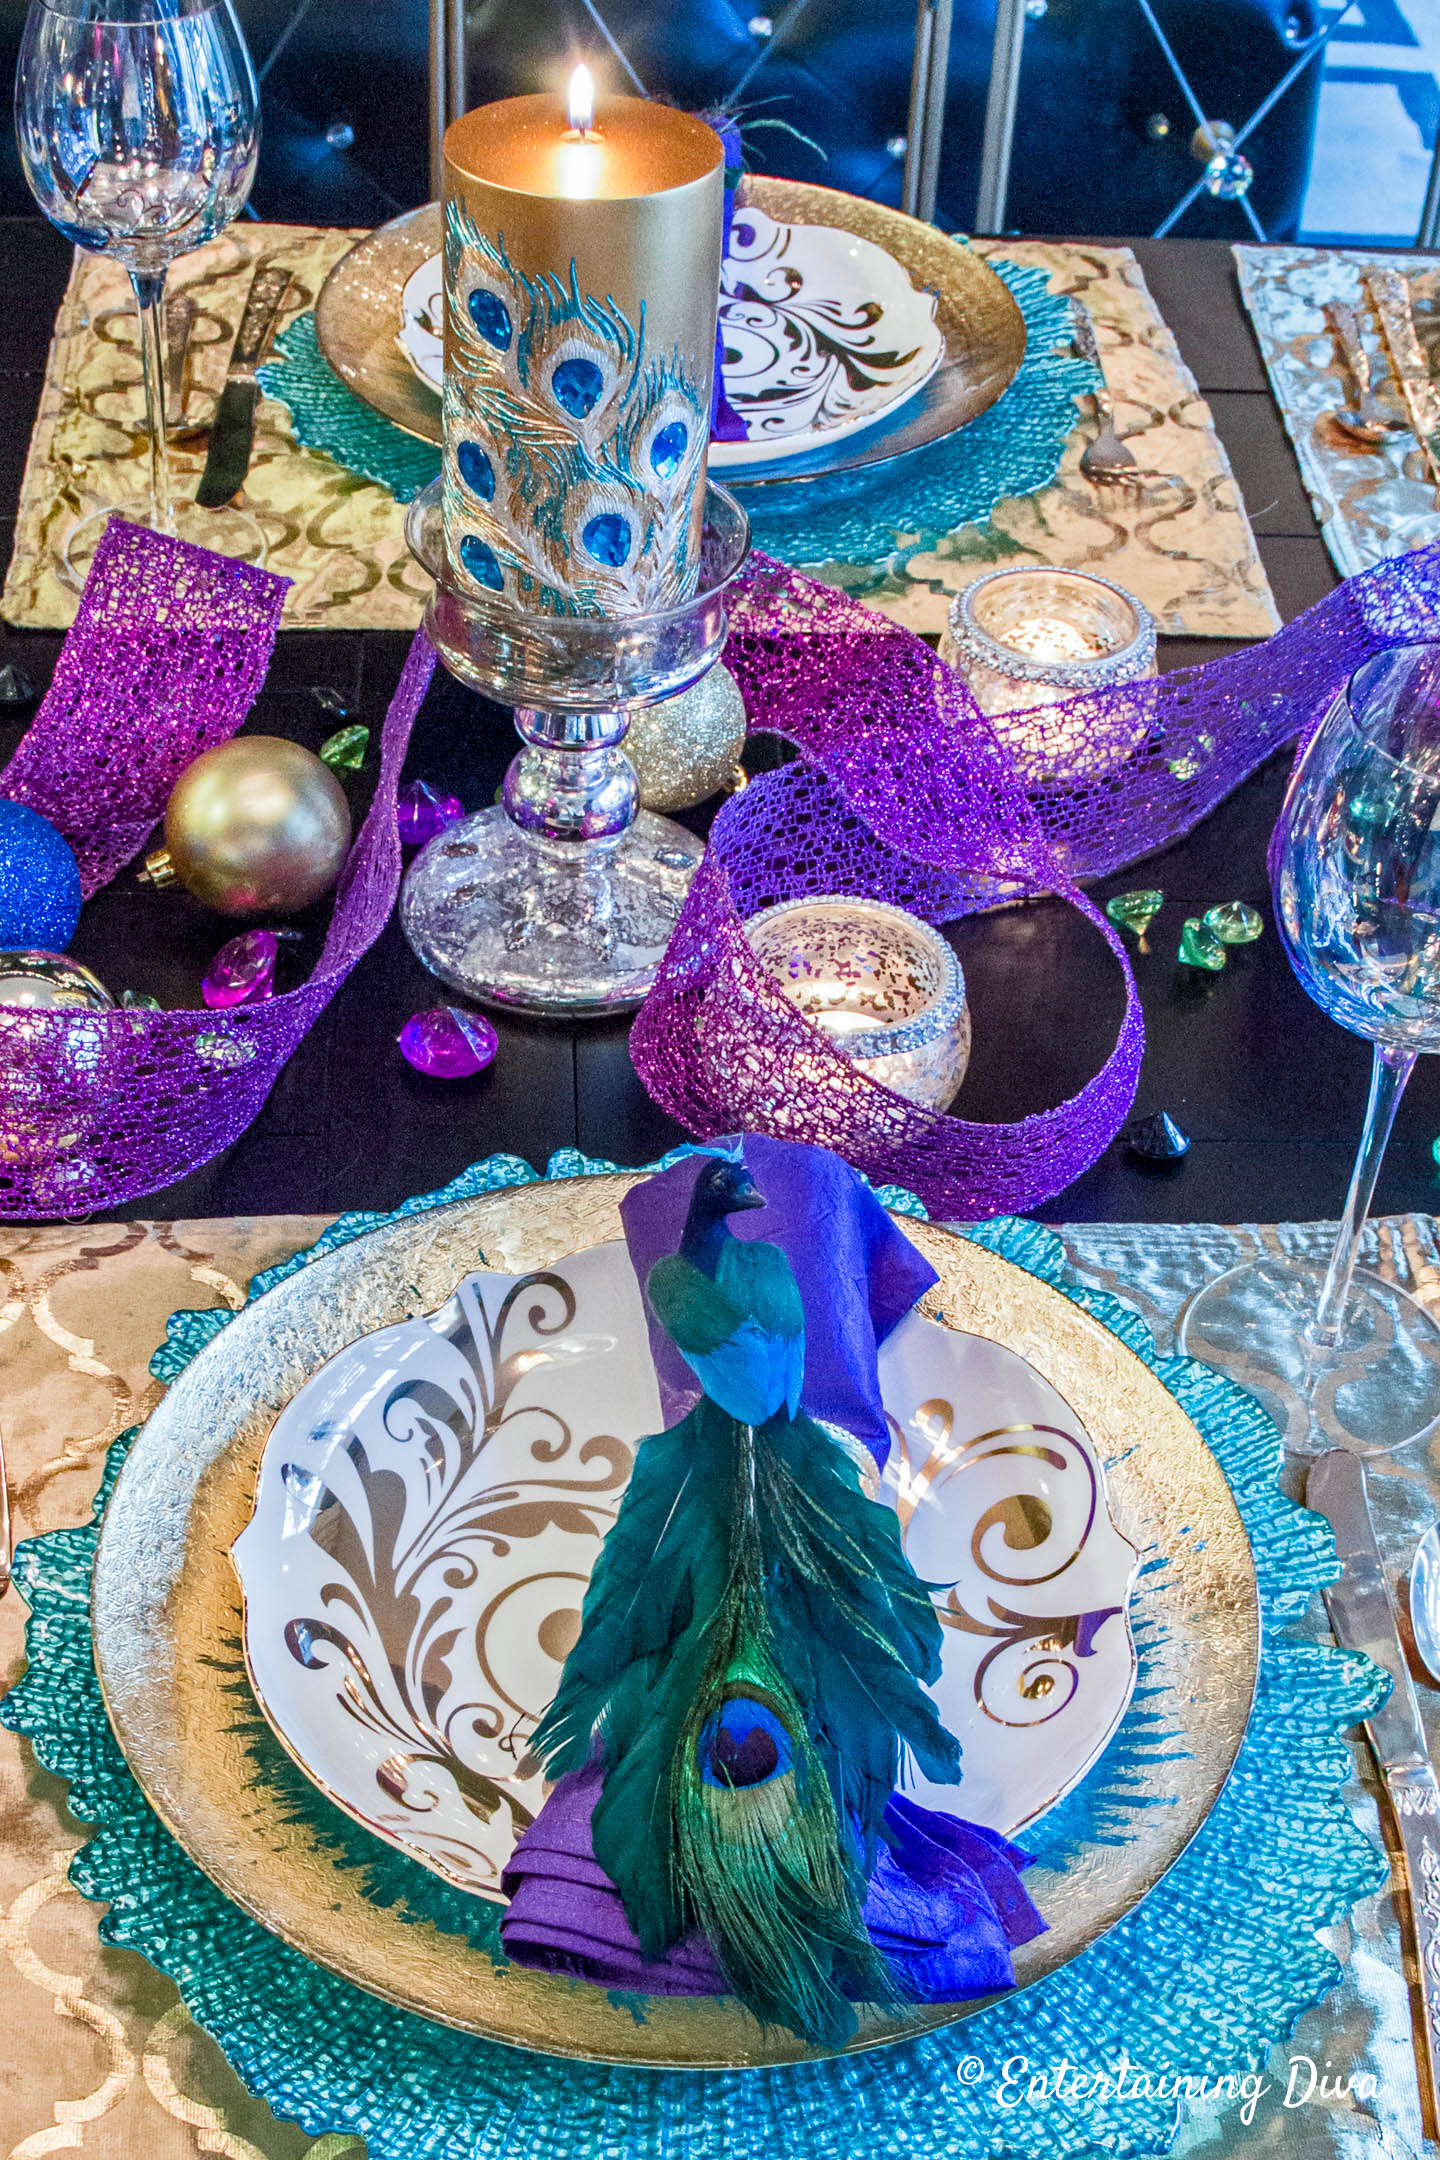 Peacock place setting and centerpiece on a Mardi Gras table setting